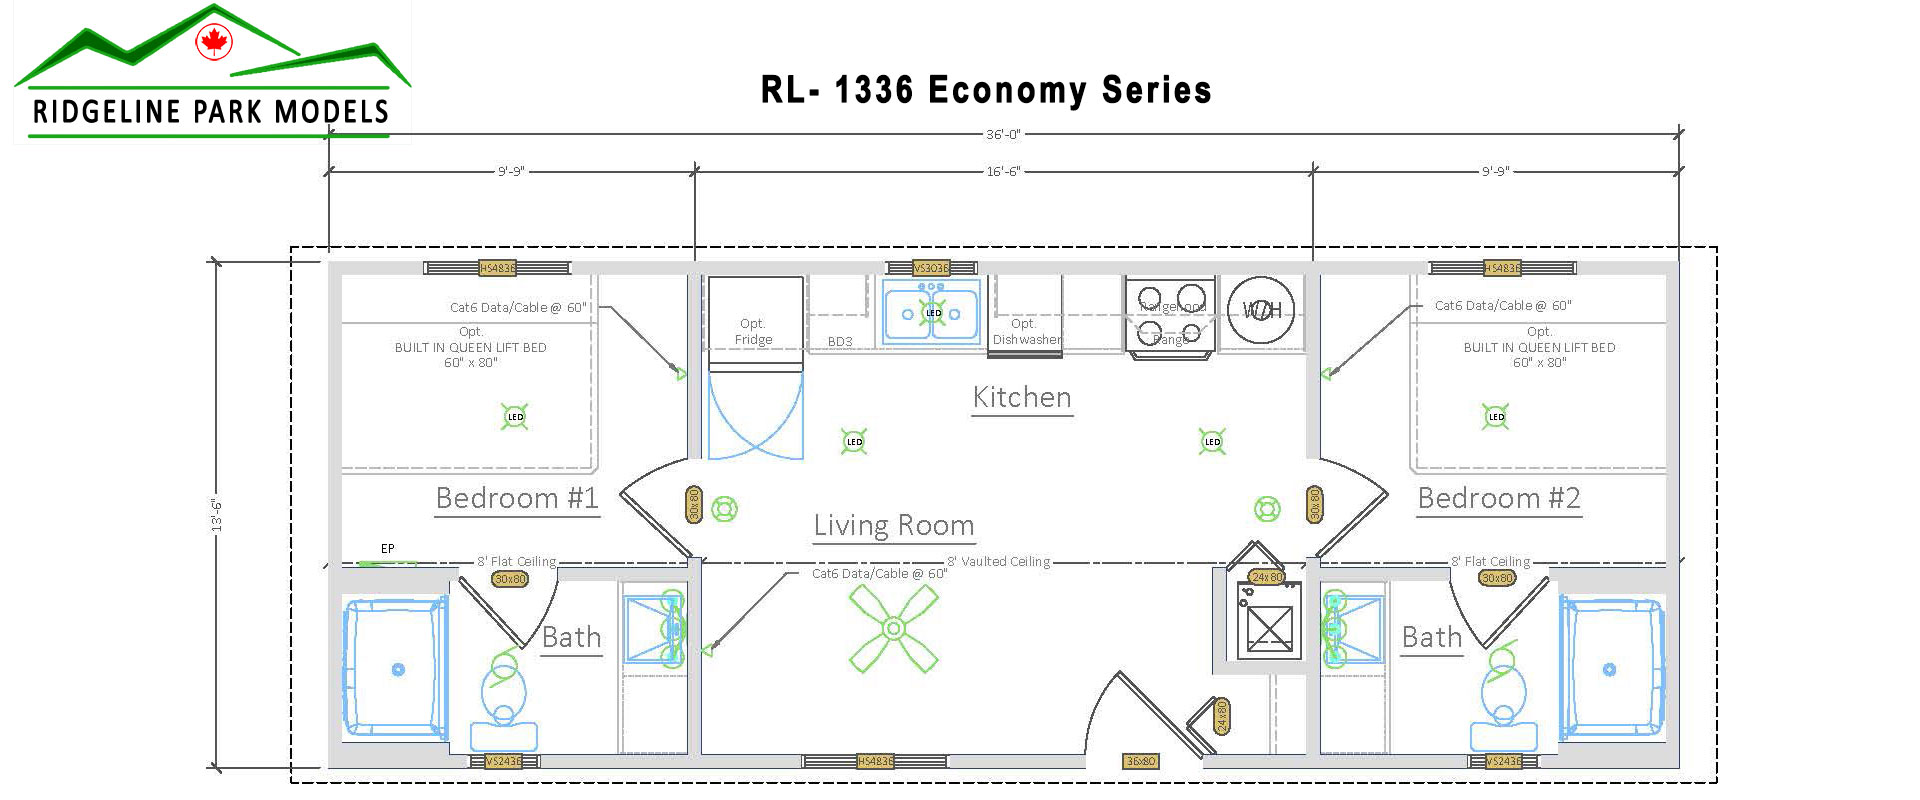 Plan RL-1336 from Ridgeline Park Models serving the Okanagan Valley and all British Columbia locations.